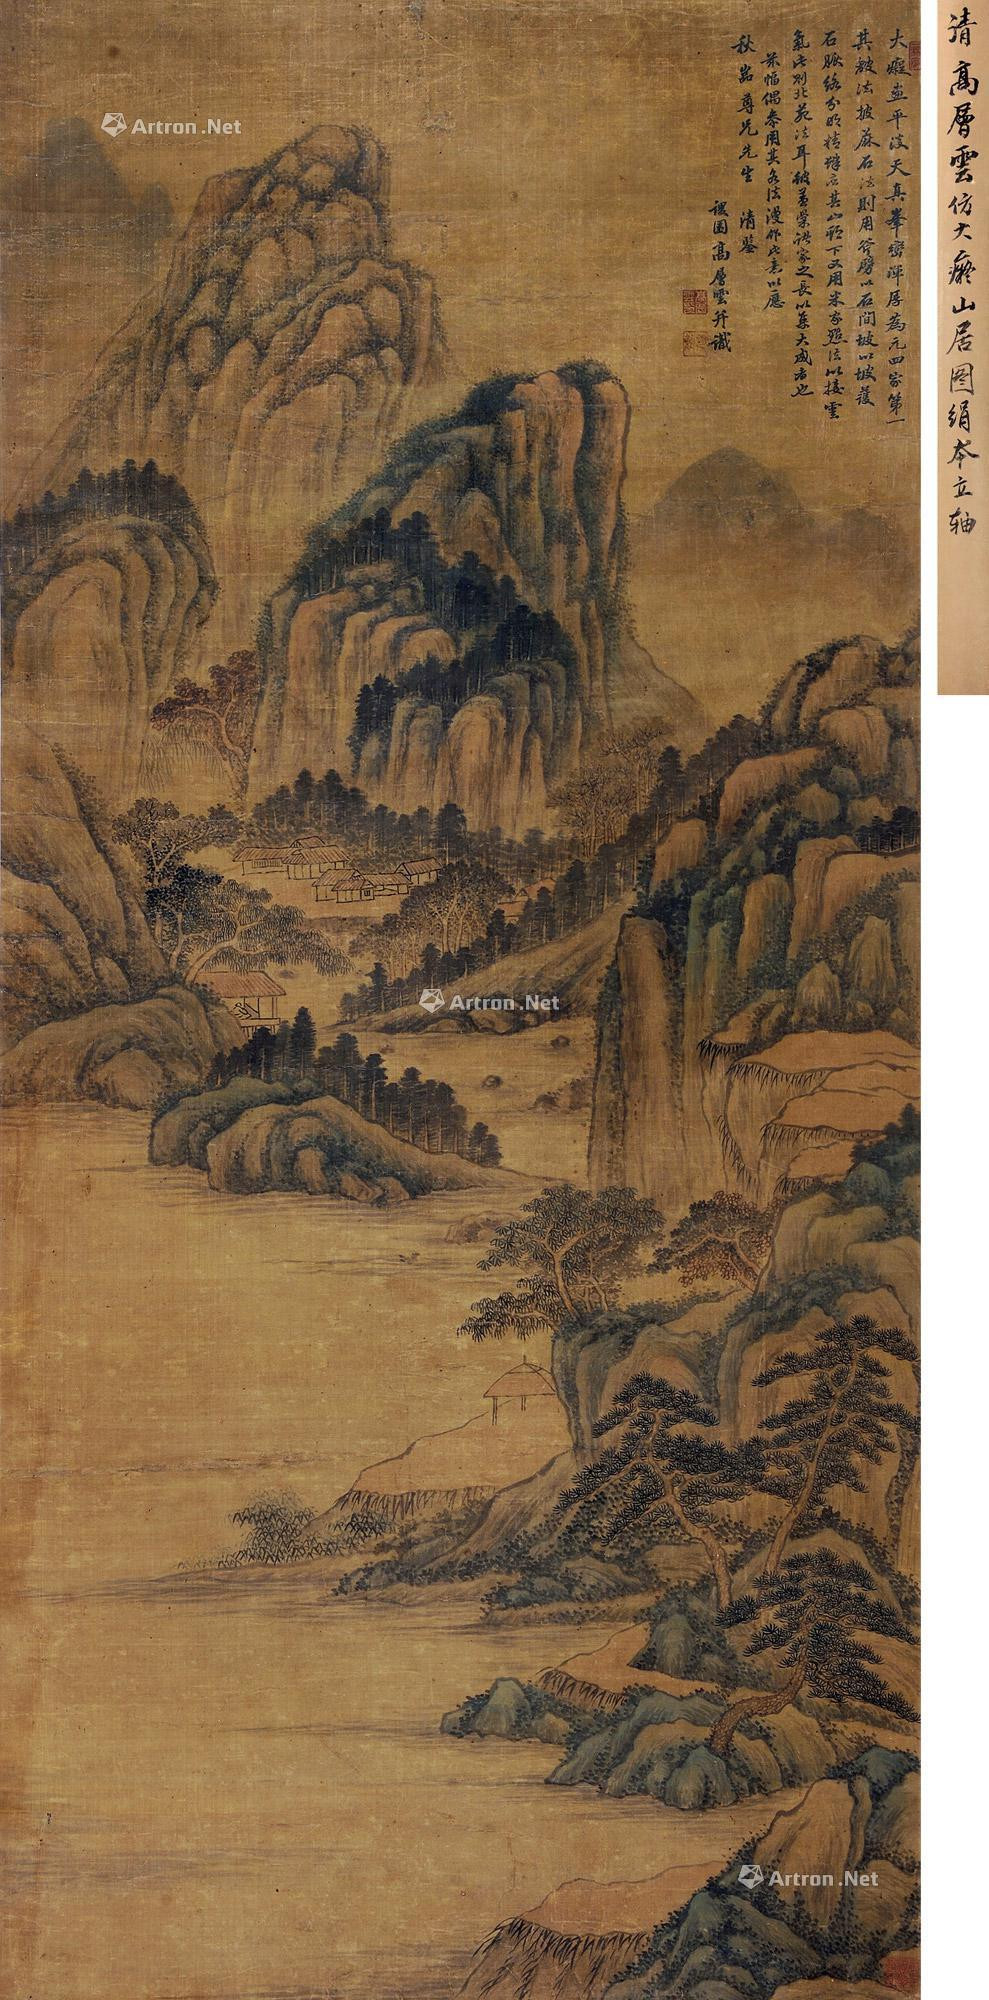 LANDSCAPE IN THE STYLE OF HUANG GONGWANG